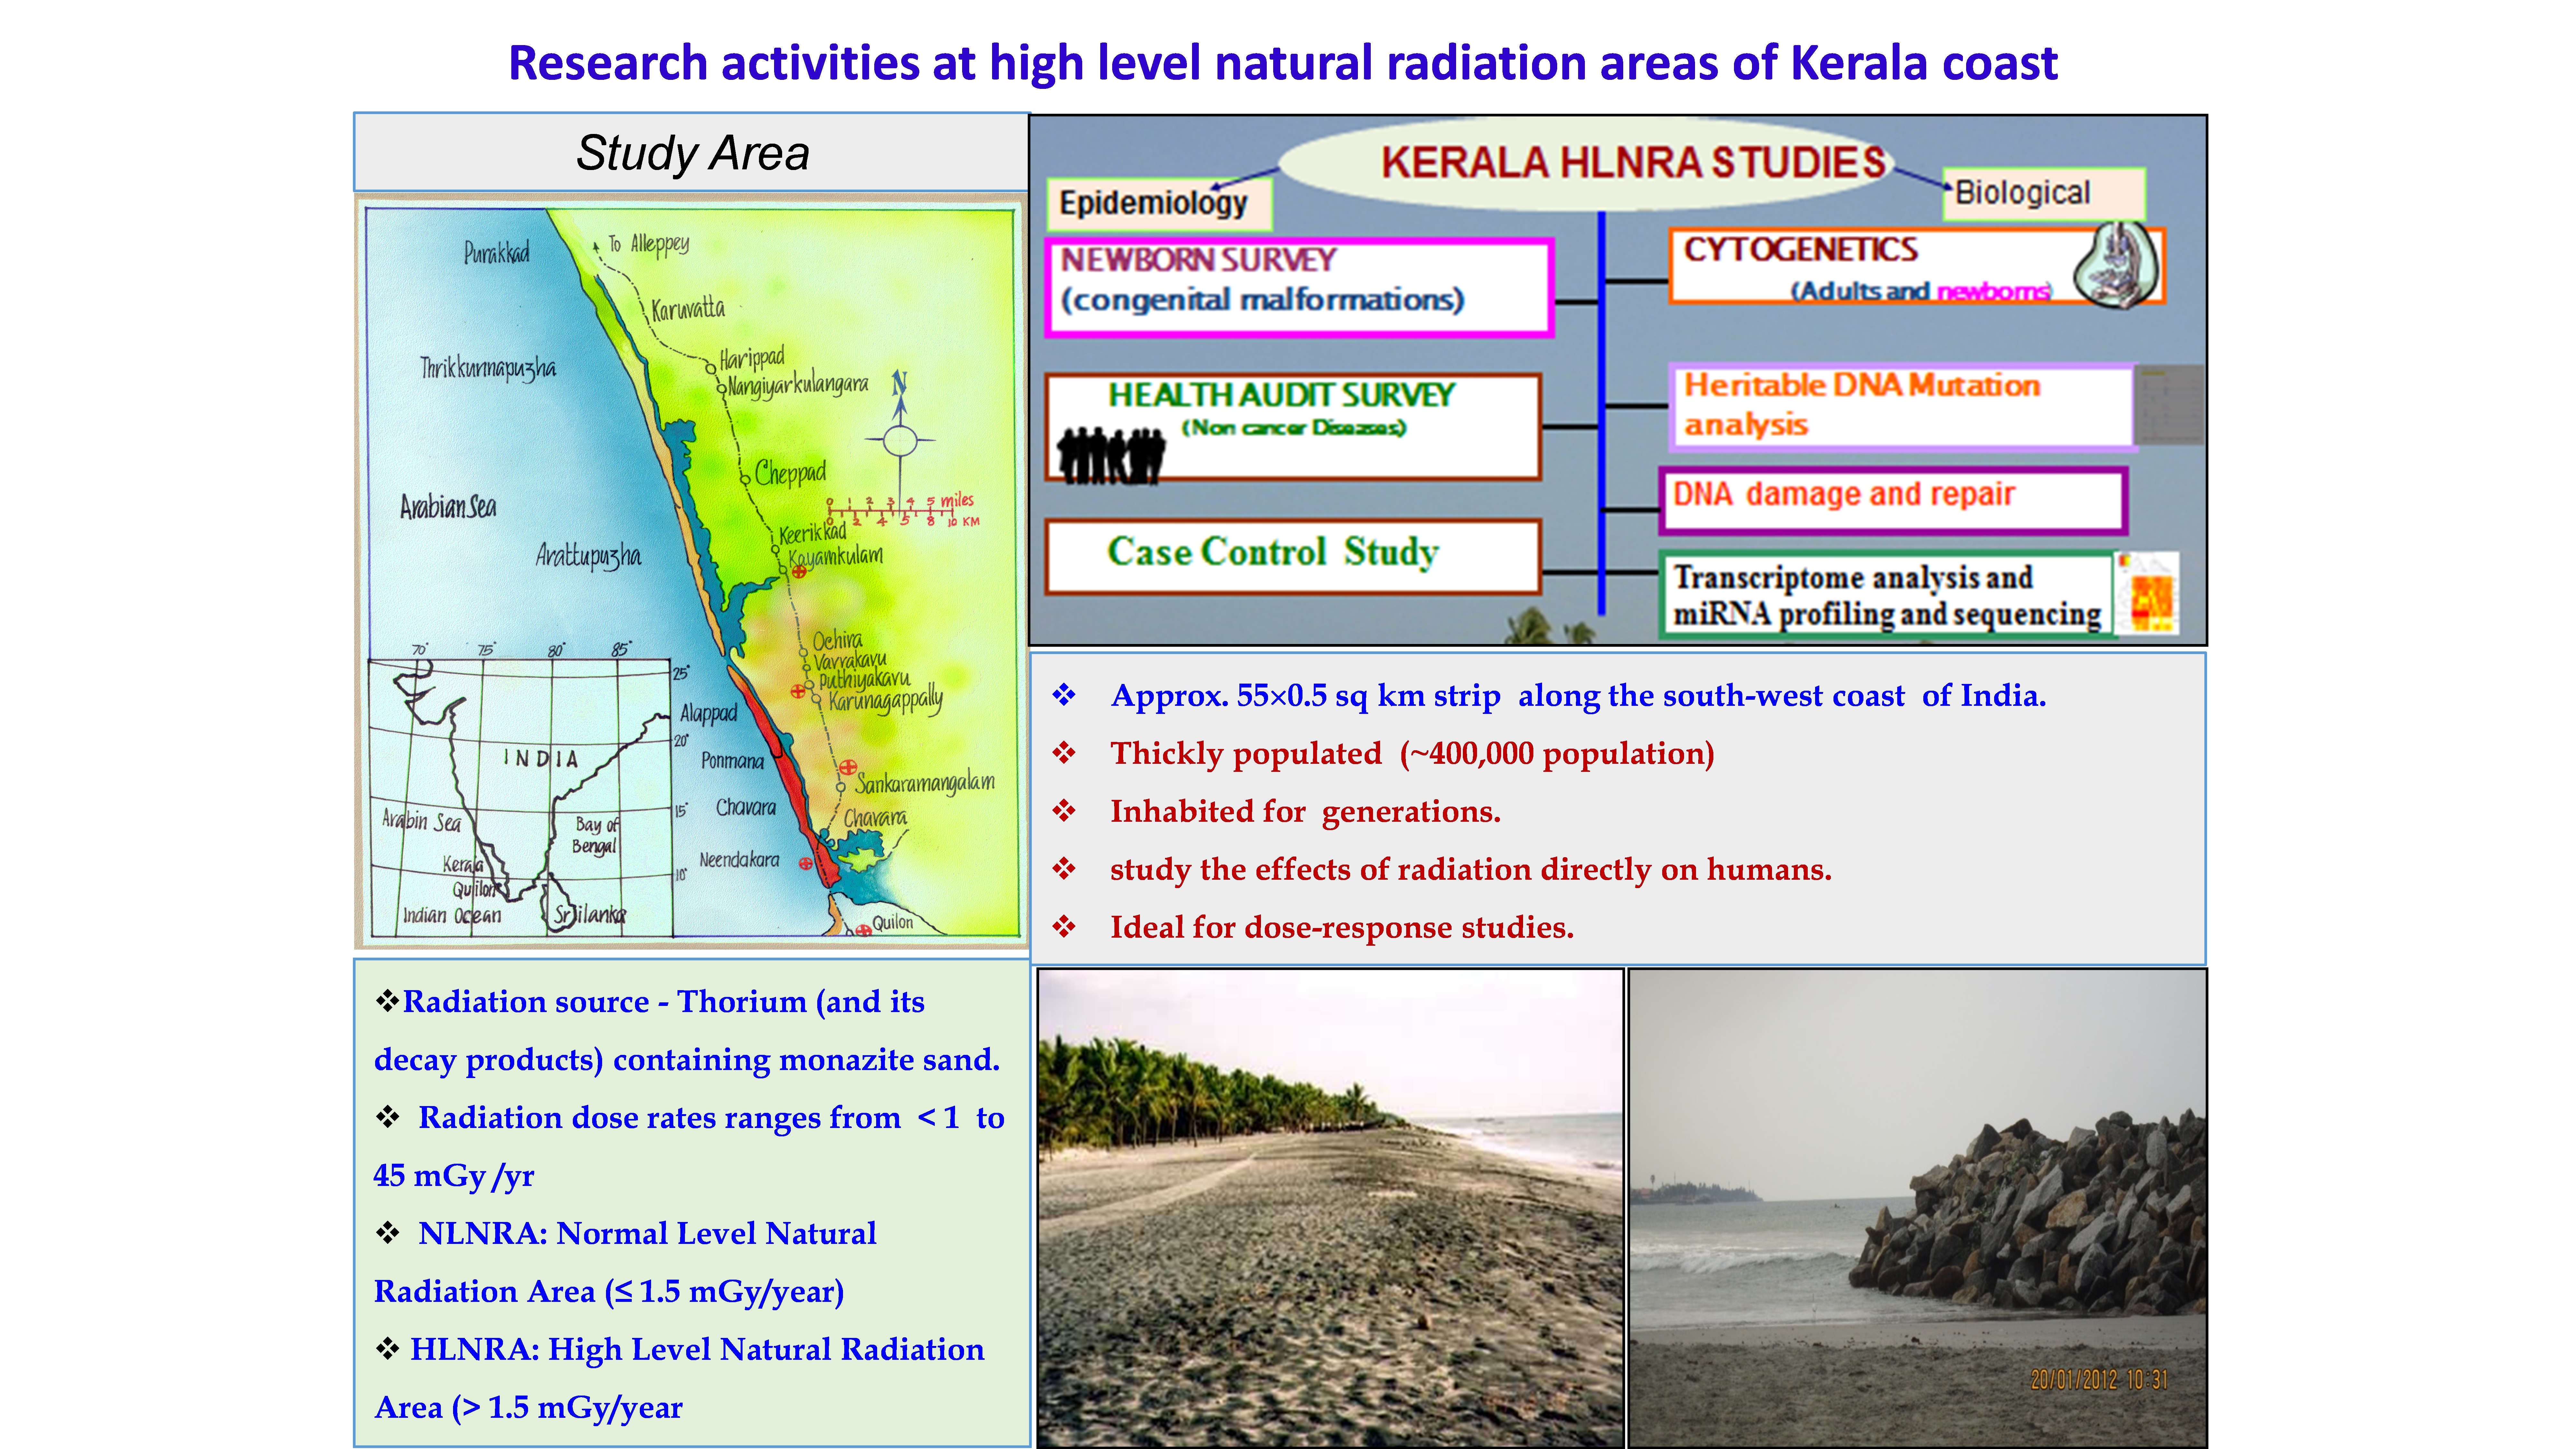 Research Activities at High Level Natural Radiation areas of Kerala